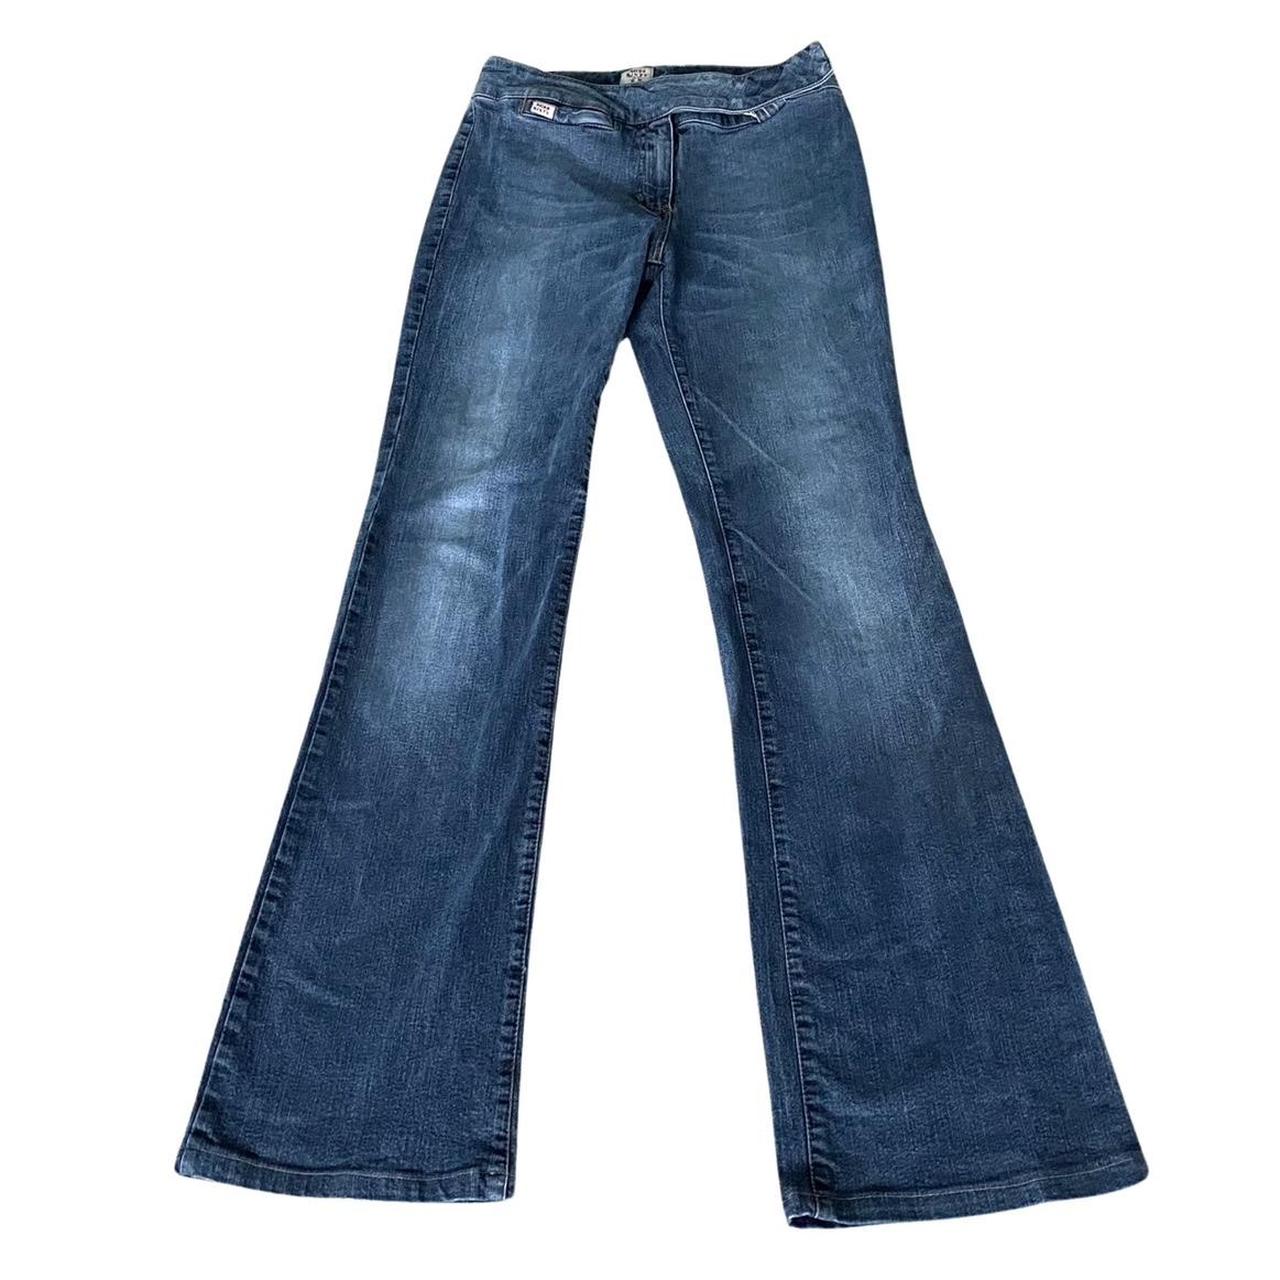 Miss sixty bootcut jeans Size S - 8/10 In great... - Depop